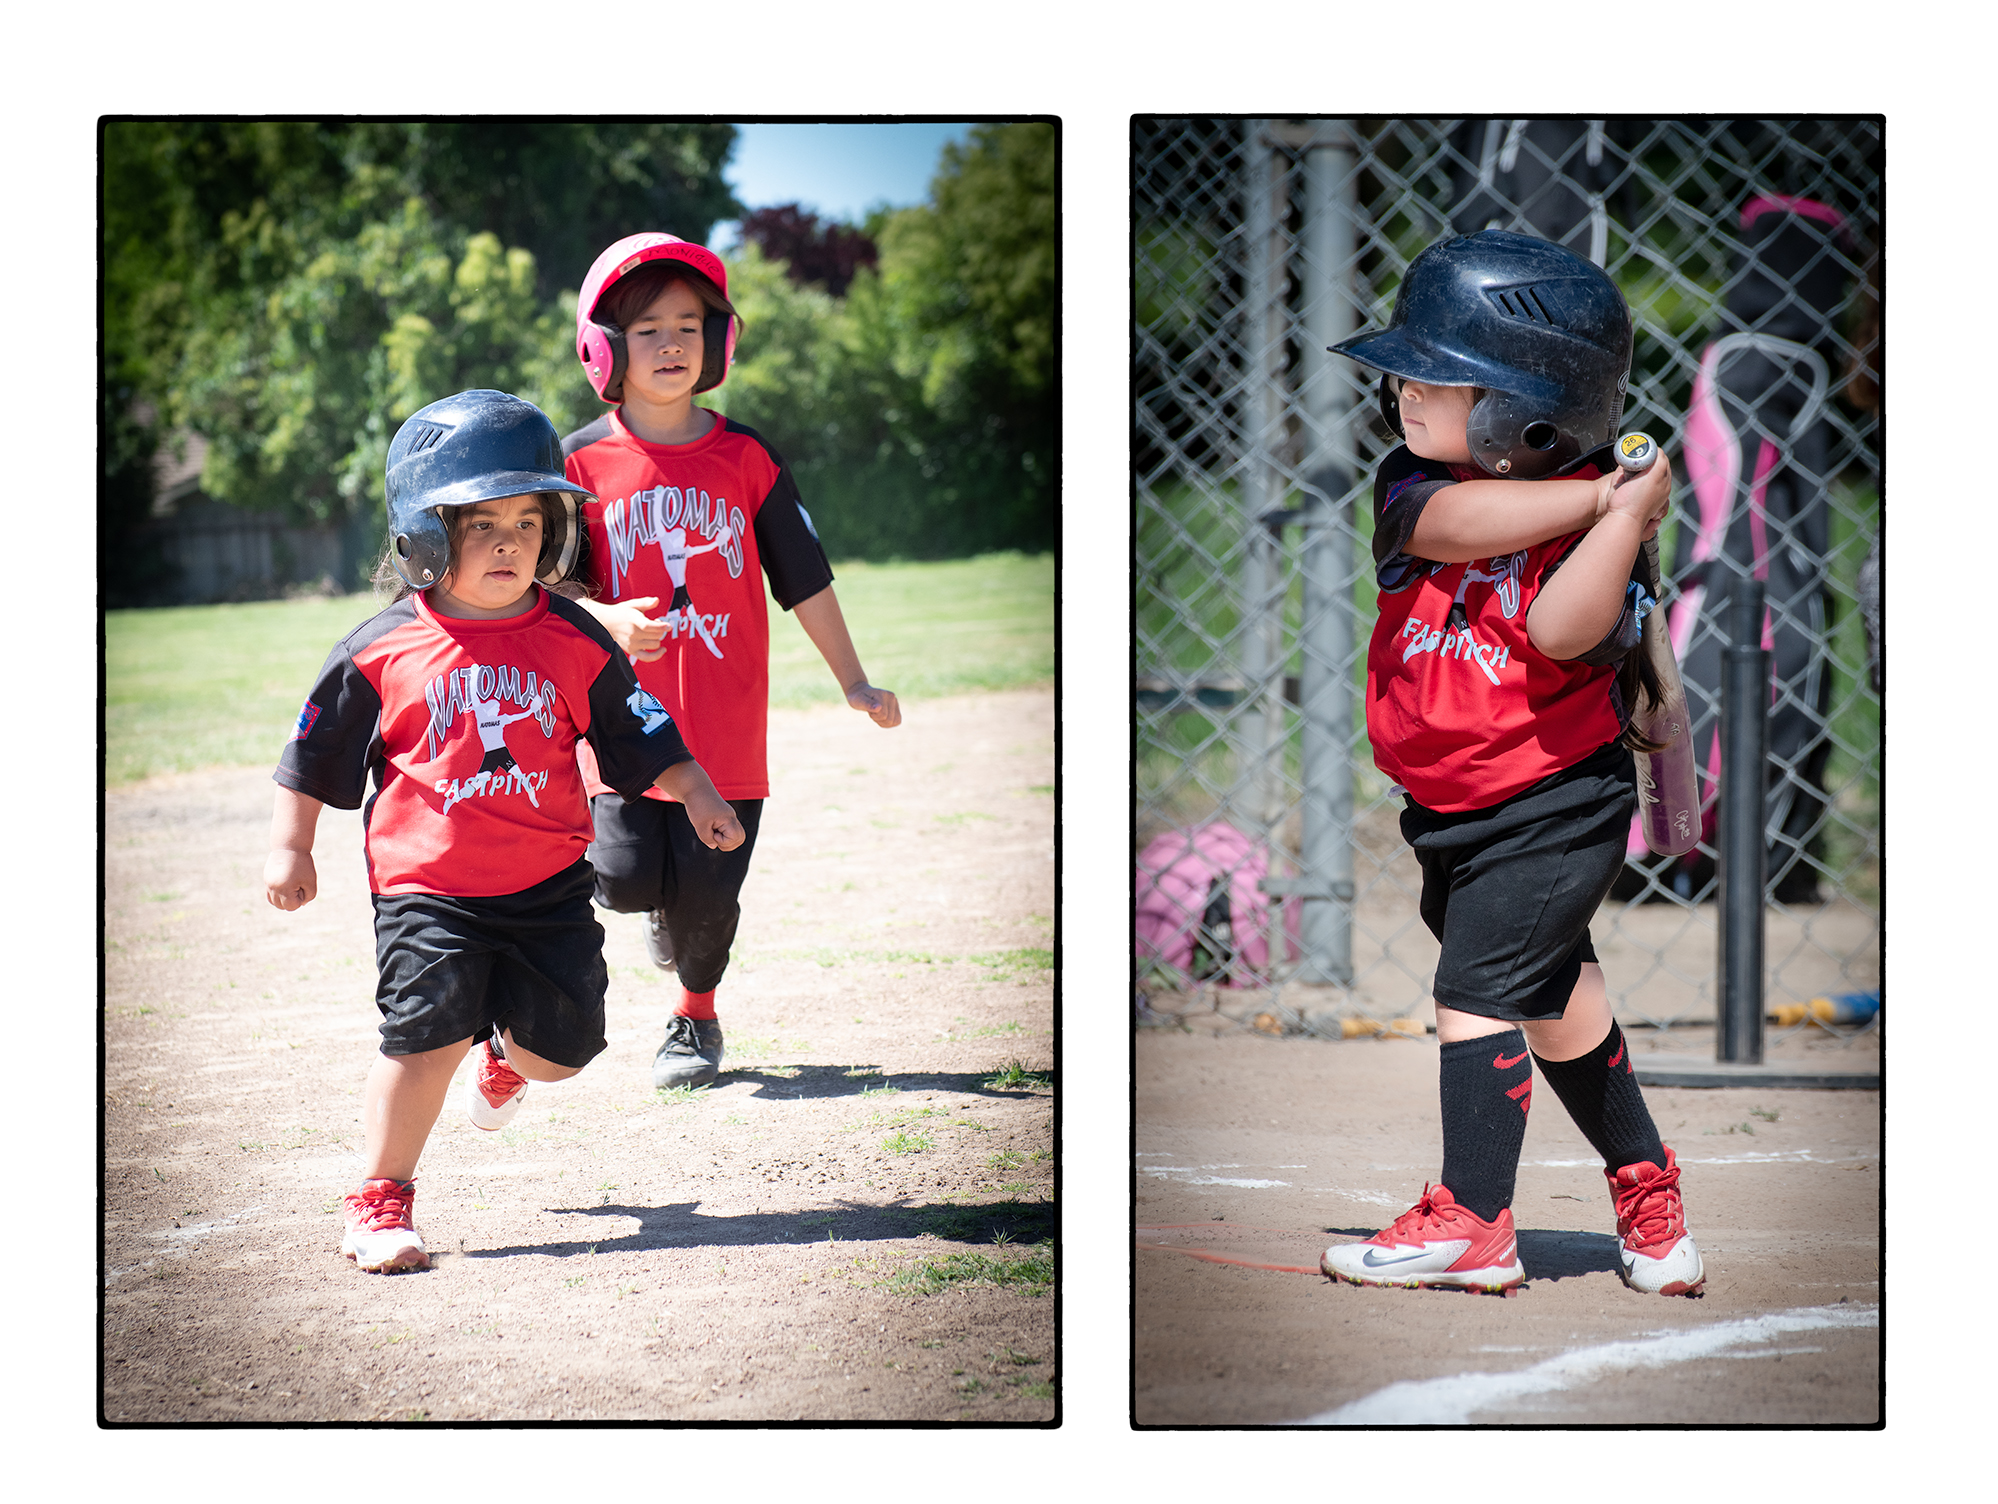 Pitcher for the Ladybugs On Base and At Bat